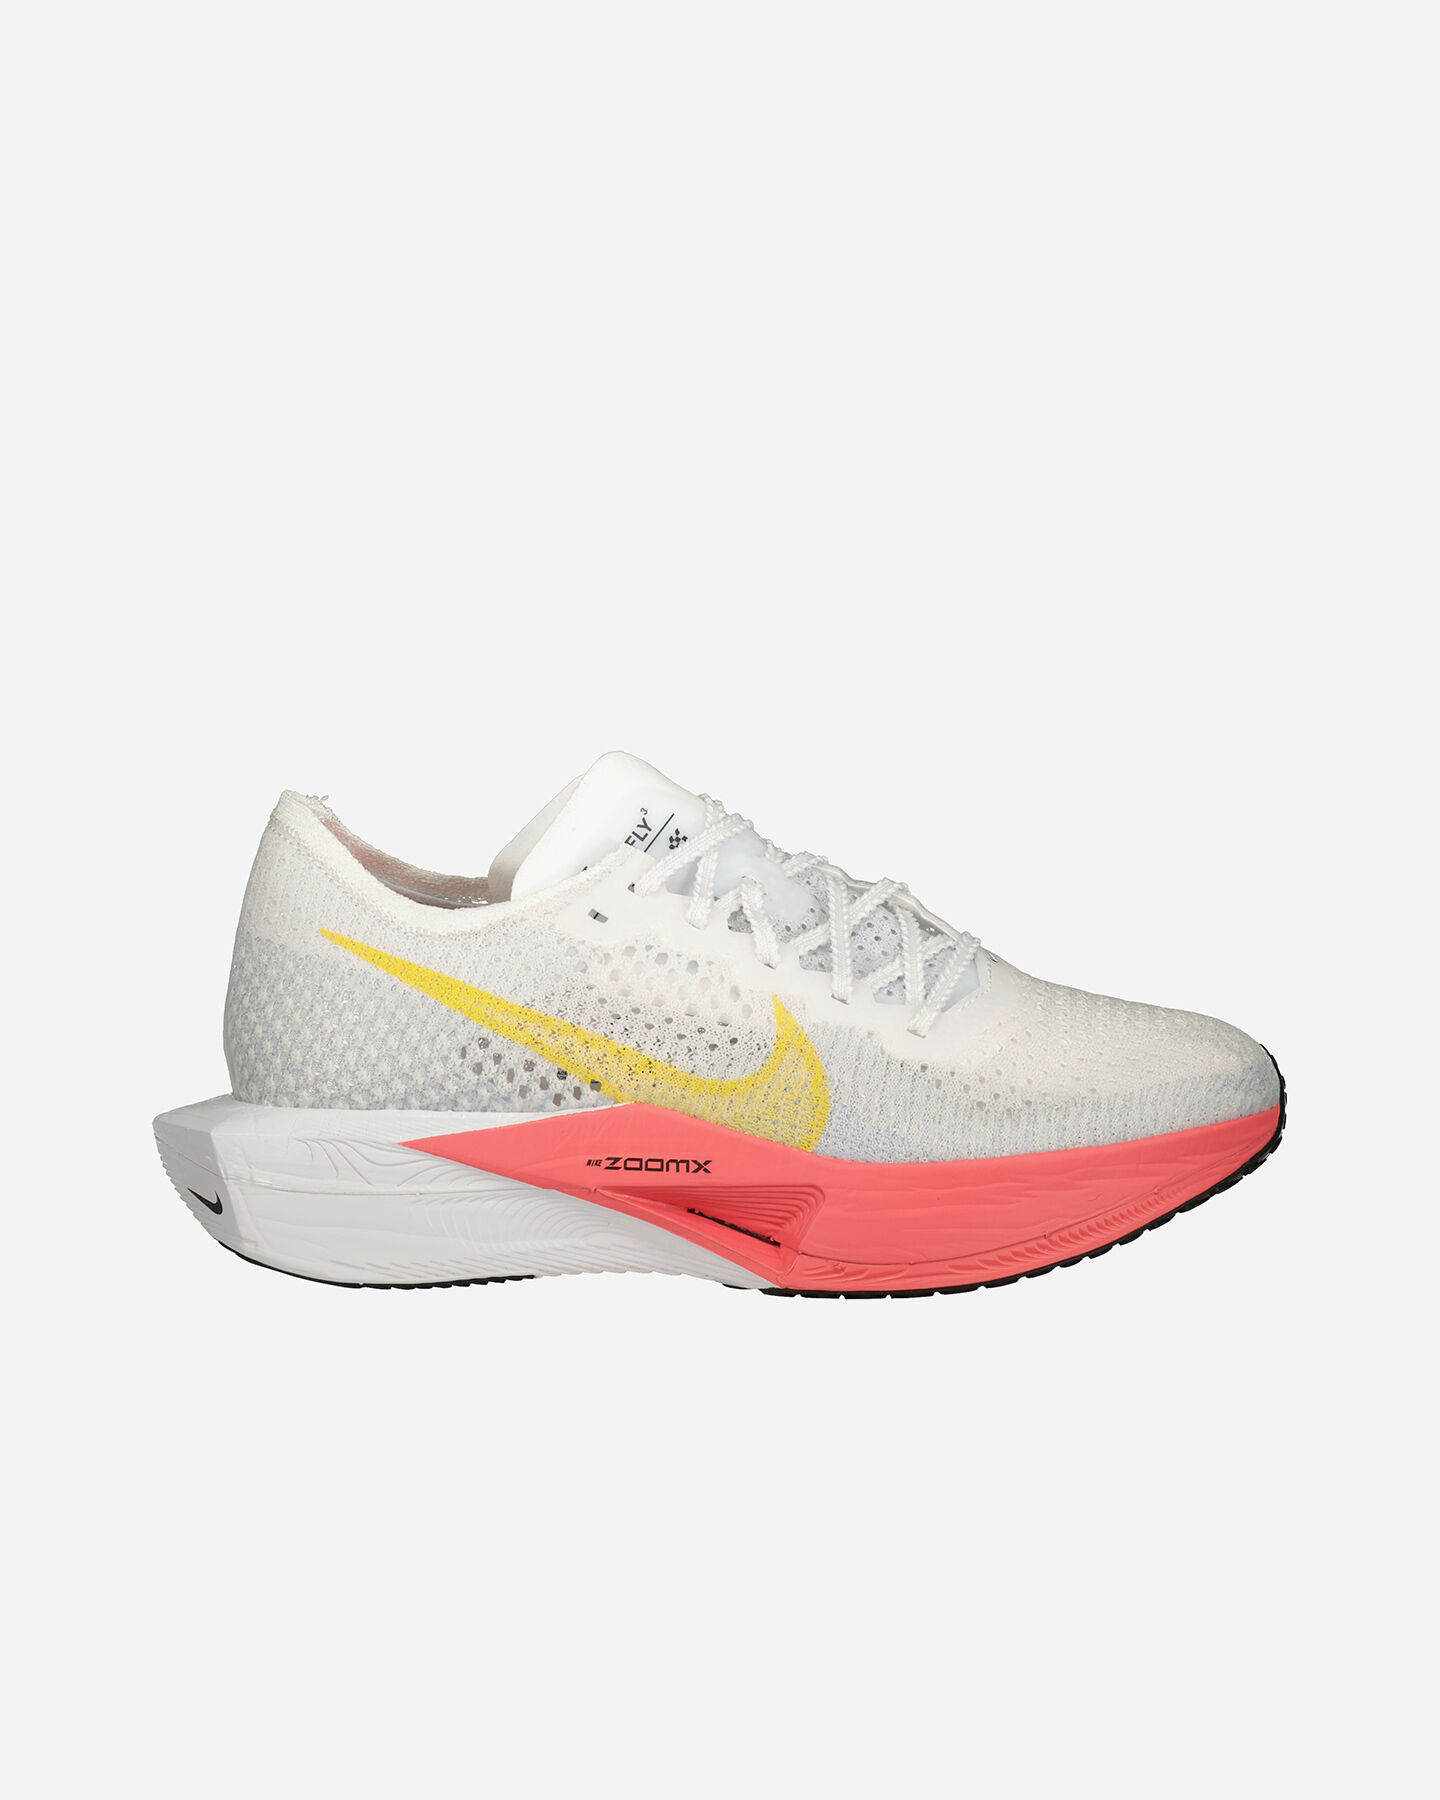  Scarpe running NIKE ZOOMX VAPORFLY NEXT% 3 W S5563002|101|5 scatto 0